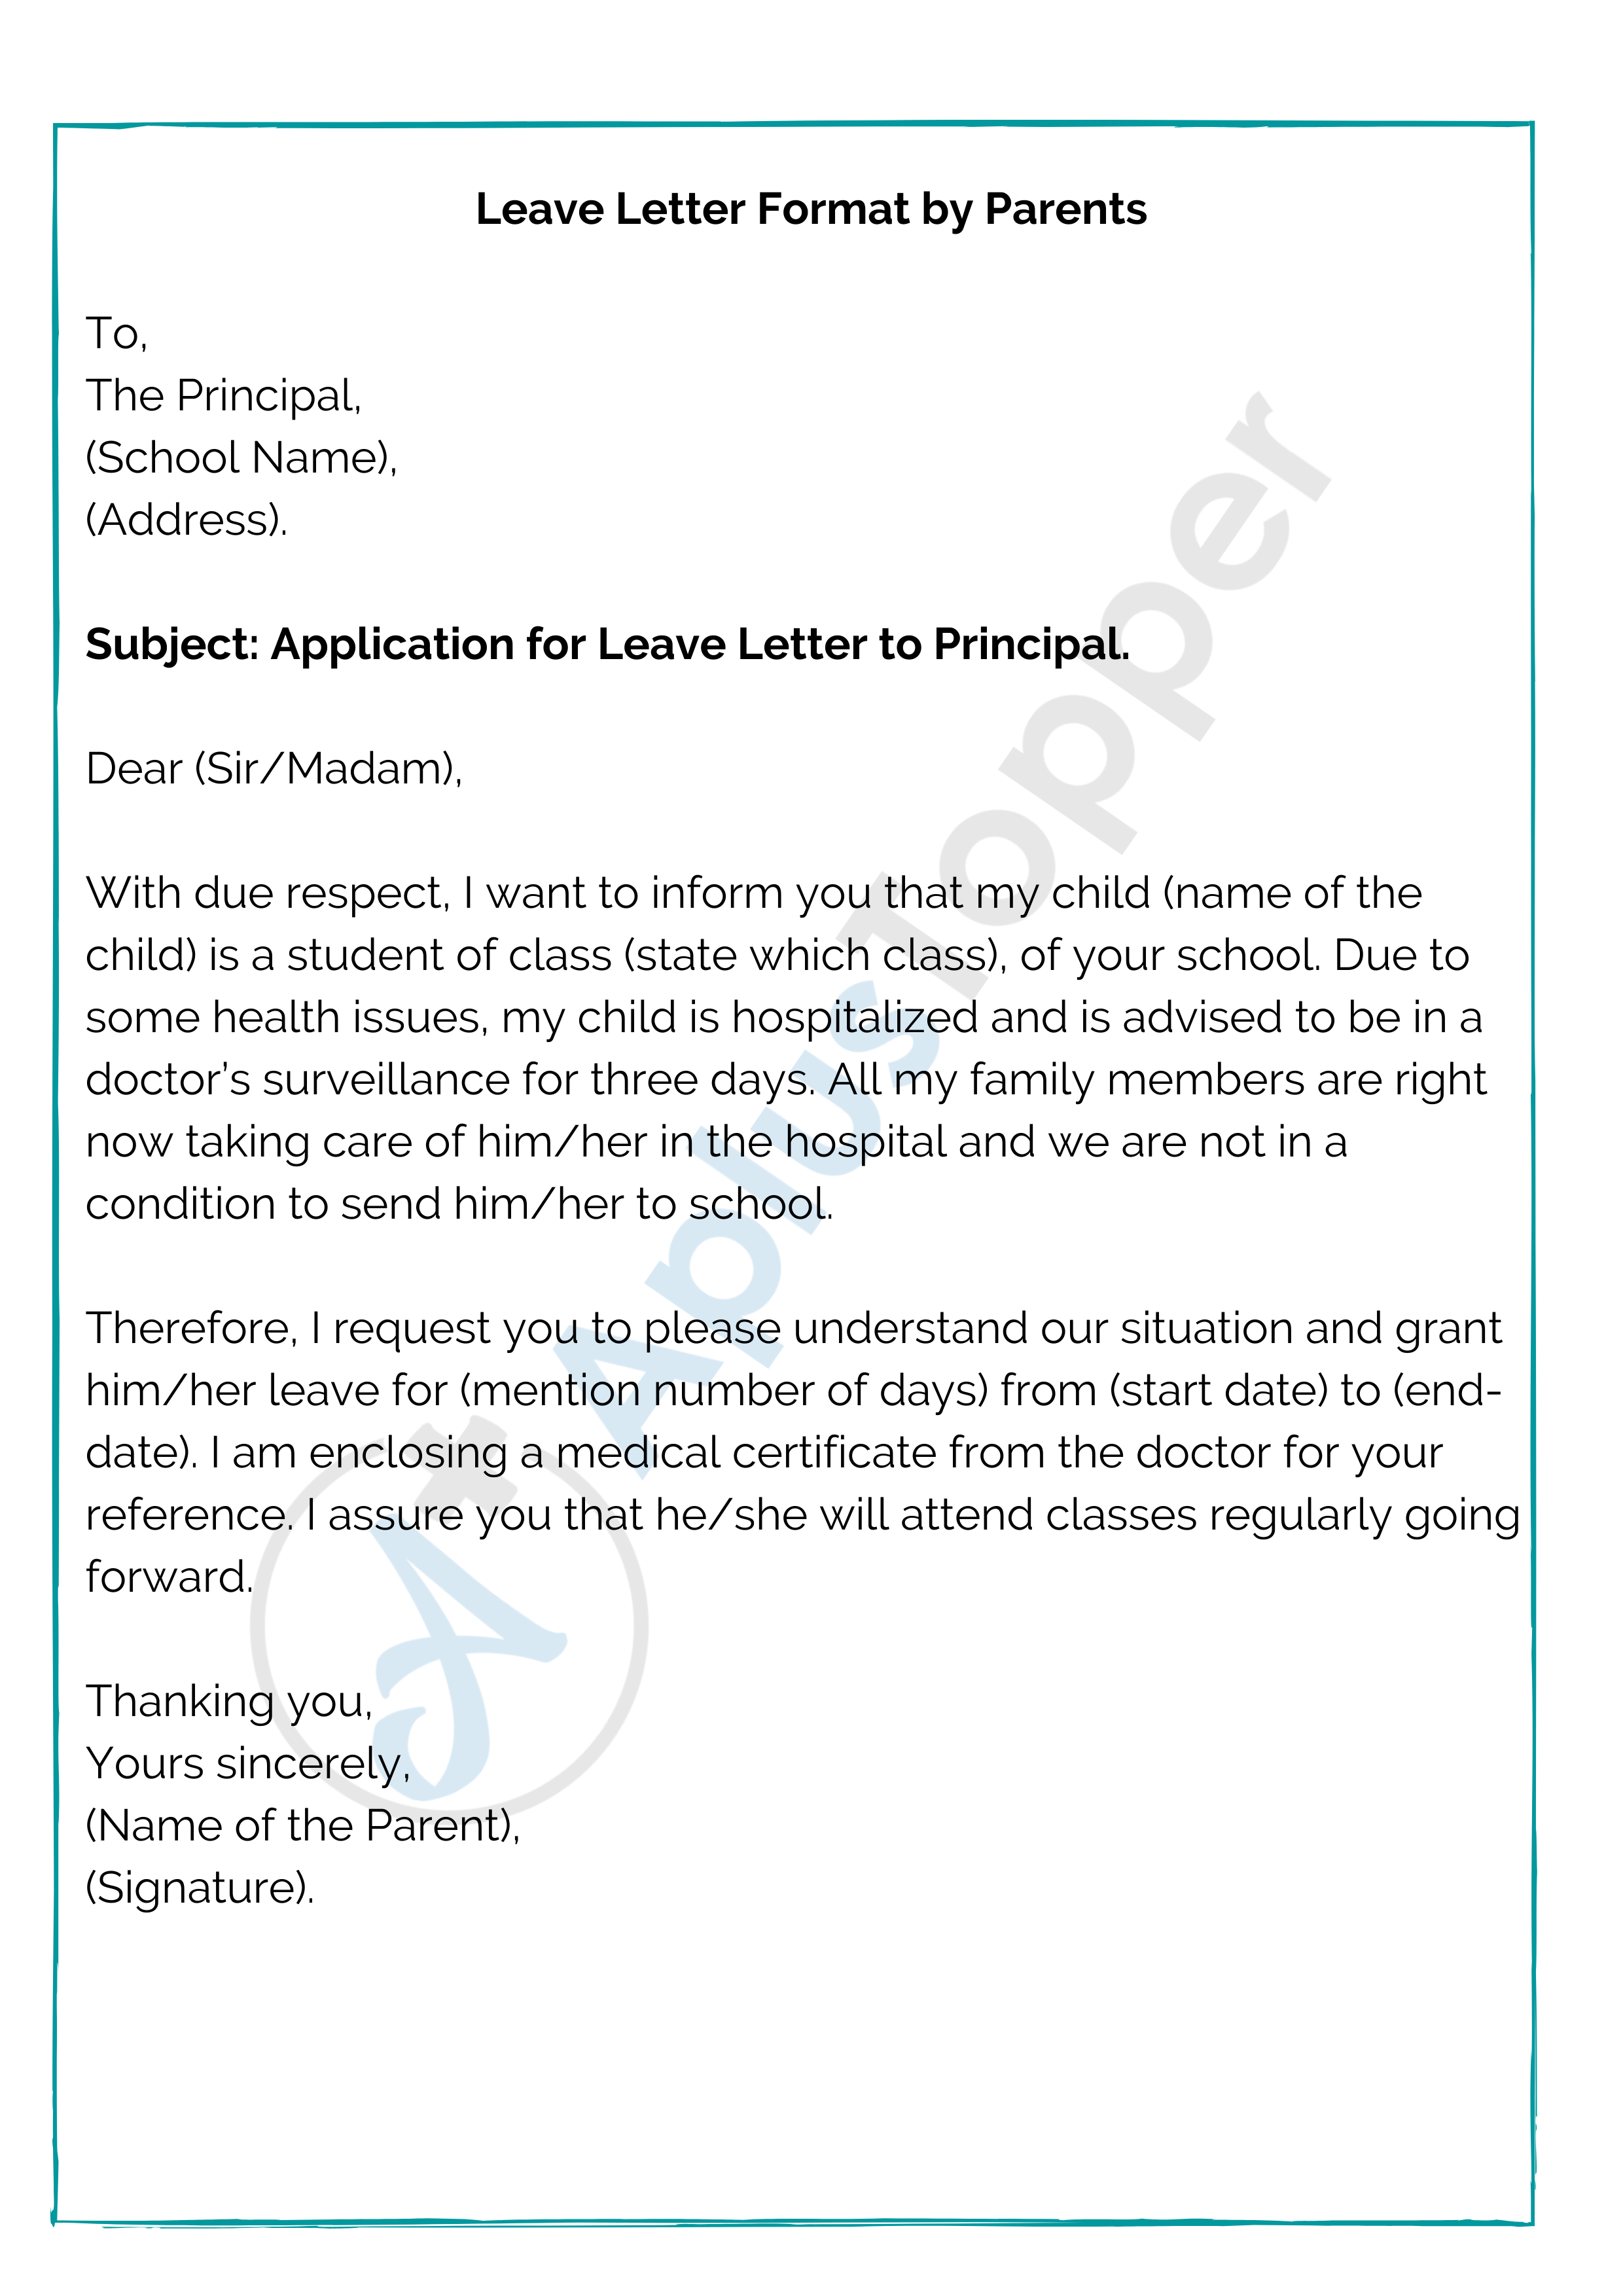 application letter for one week leave